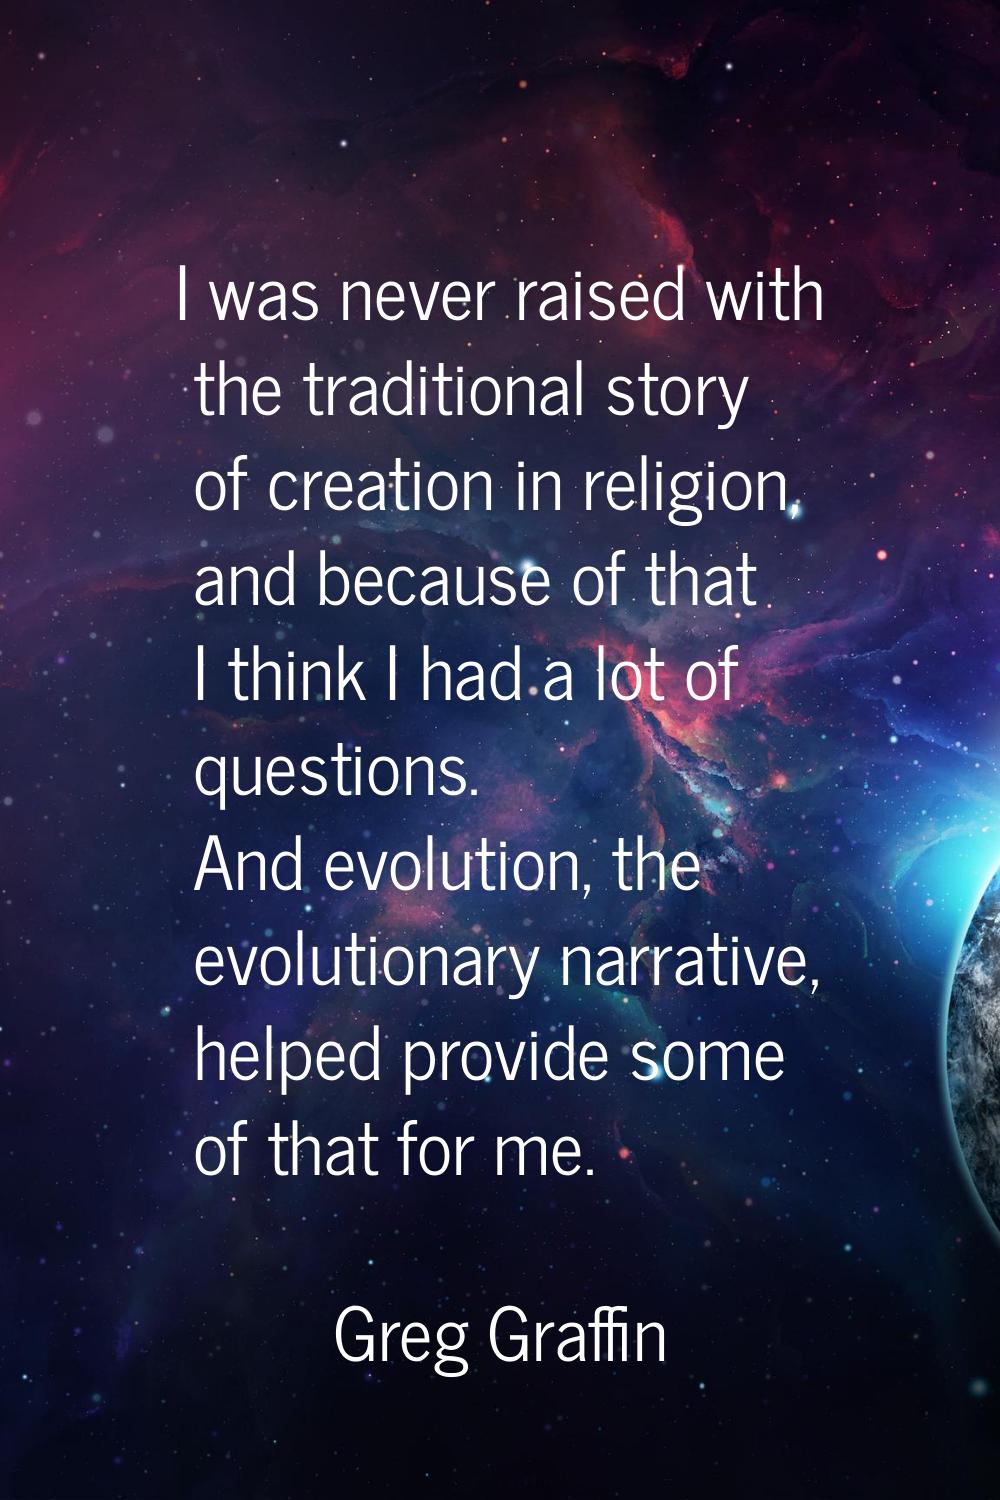 I was never raised with the traditional story of creation in religion, and because of that I think 